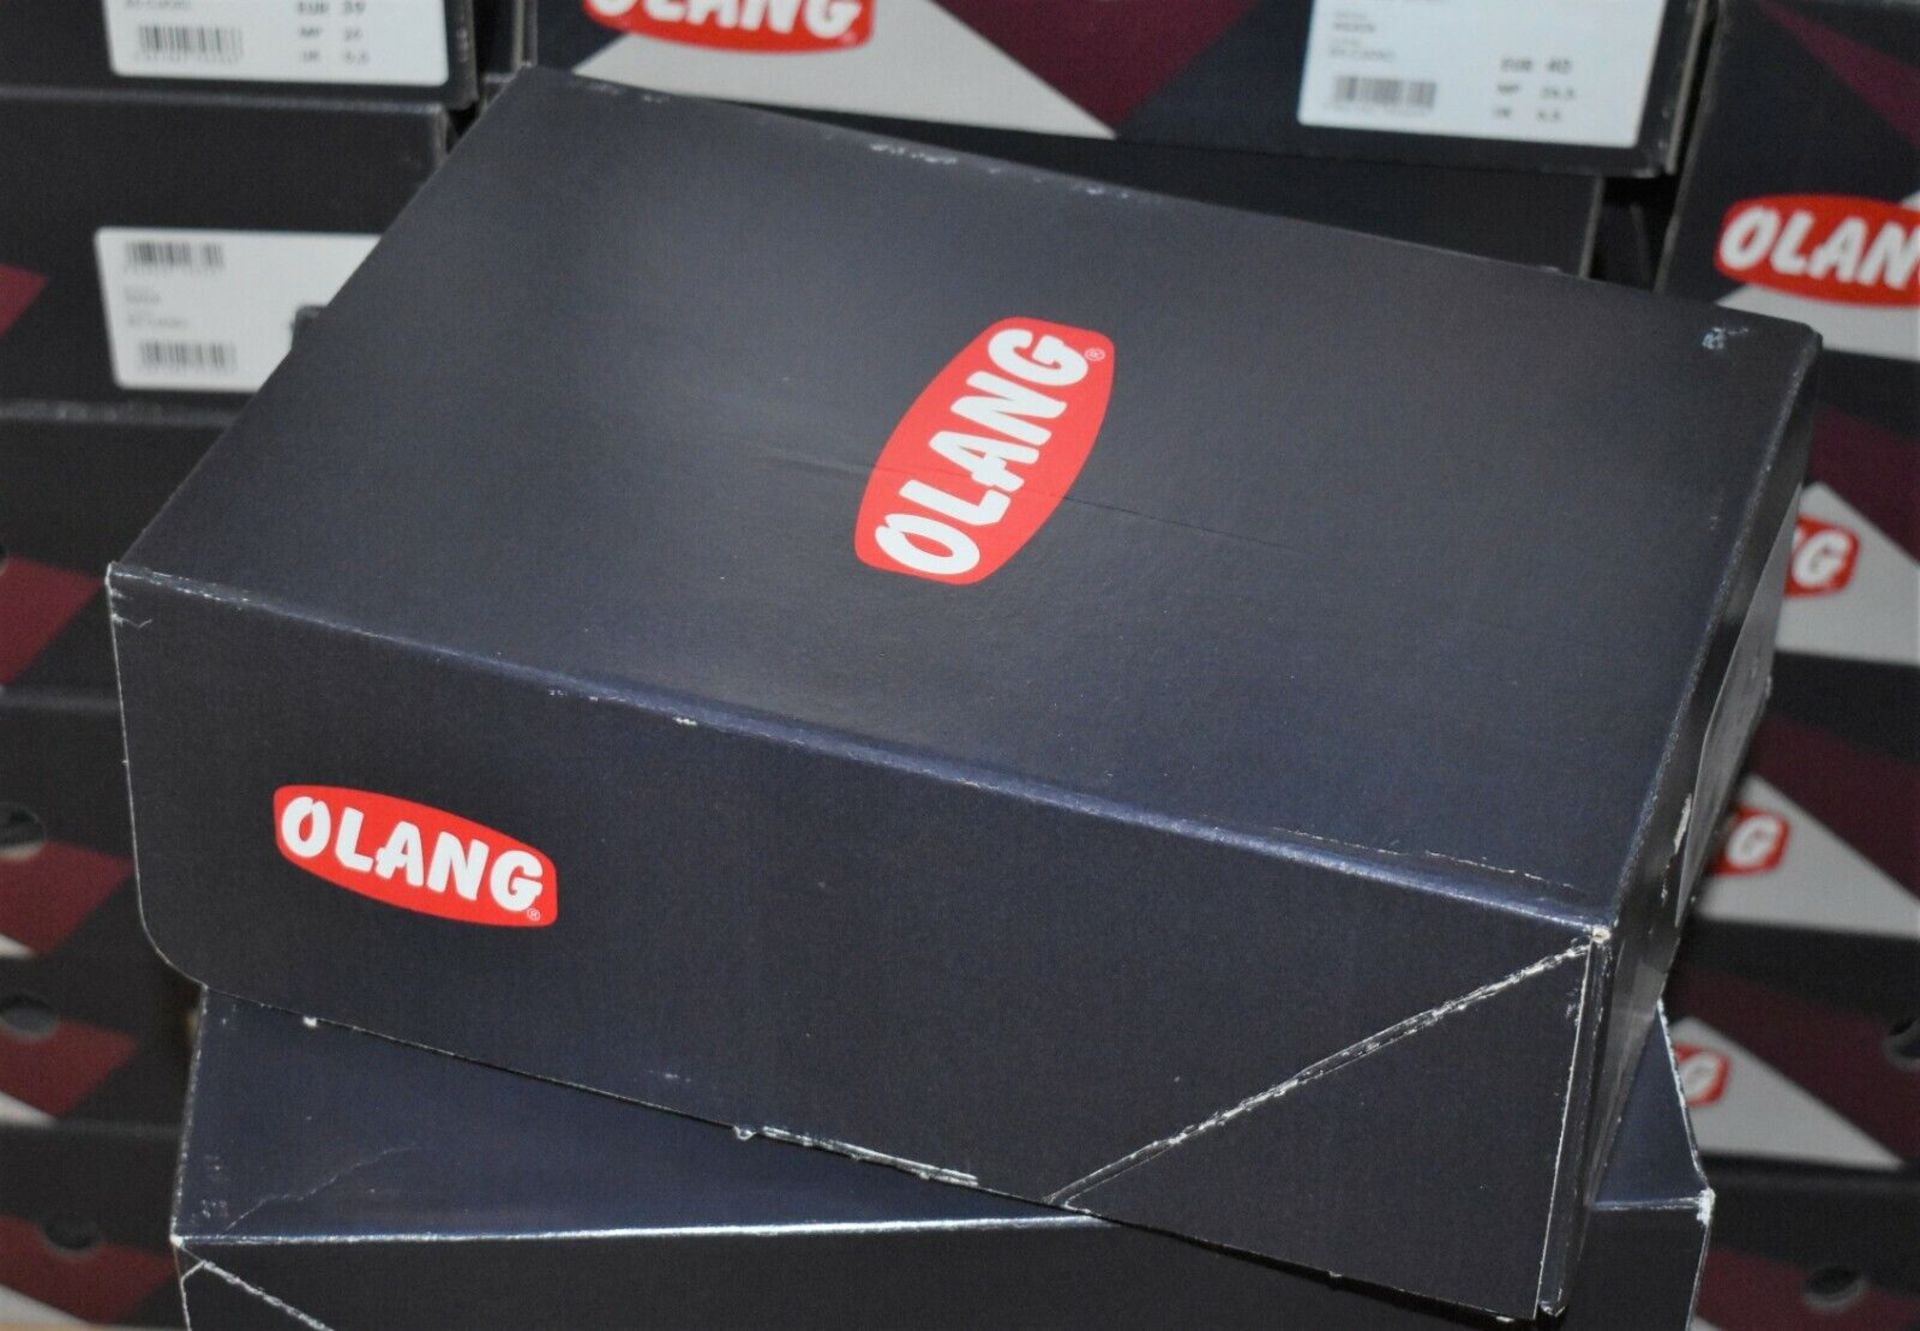 1 x Pair of Designer Olang Women's Winter Boots - Merano.Win.BTX 85 Cuoio - Euro Size 41 - New Boxed - Image 2 of 2